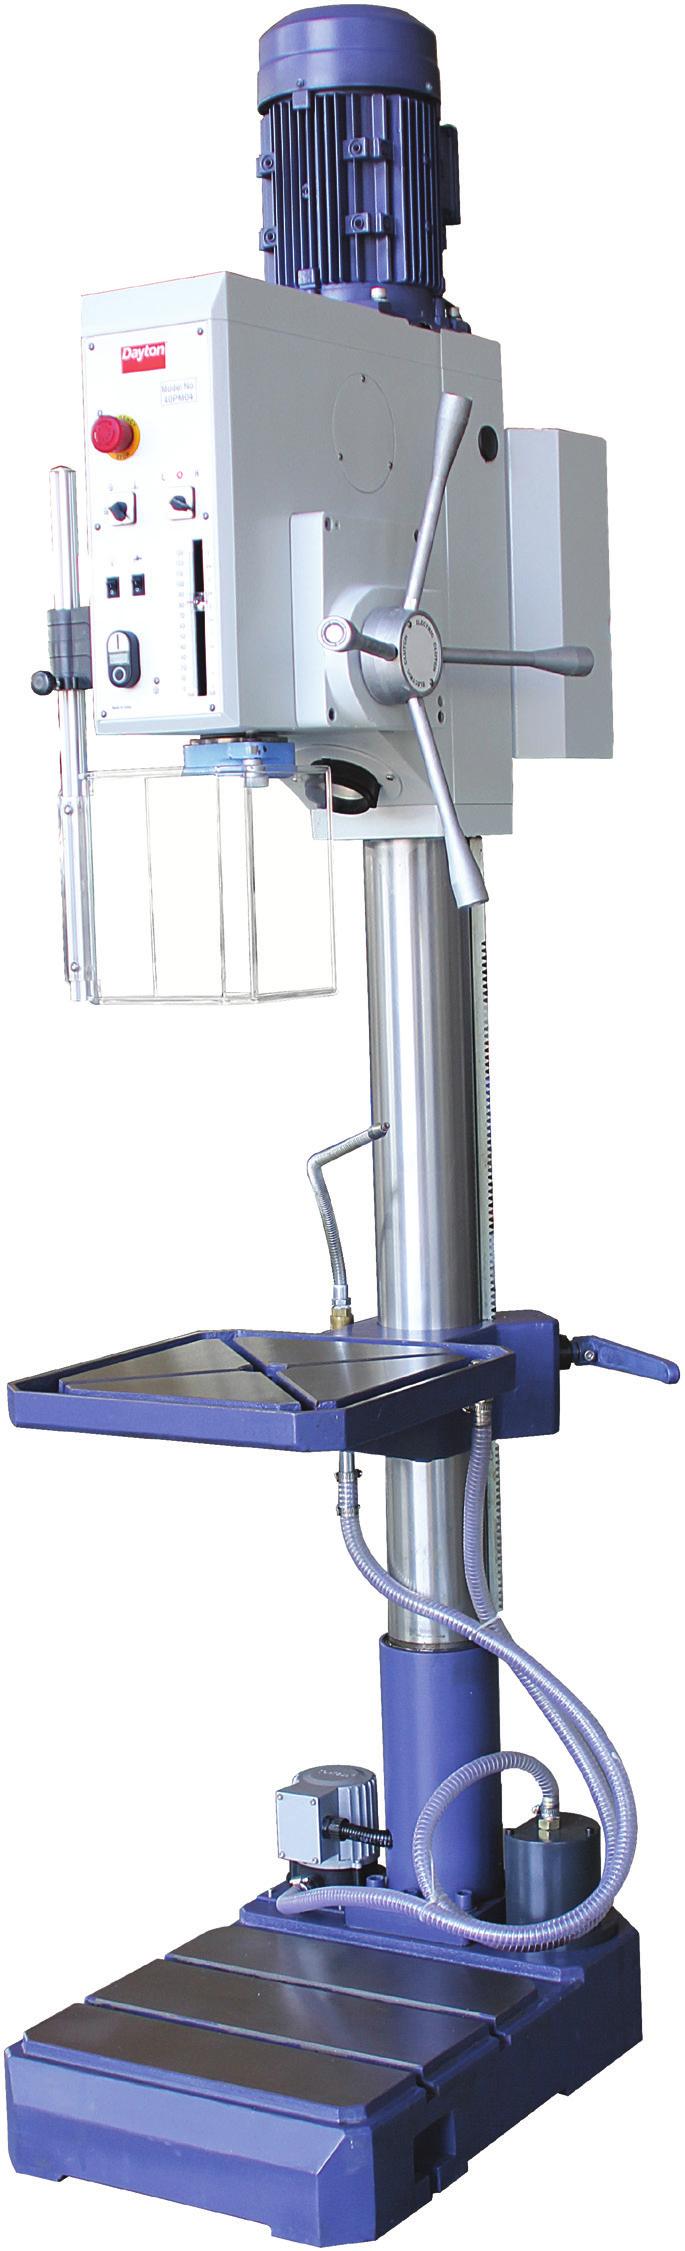 22 GEAR HEAD DRILL PRESS WITH ELECTRO-MAGNETIC CLUTCH POWER FEED This versatile all gear drive drill press is ideal for precision drilling applications and continuous industrial use.